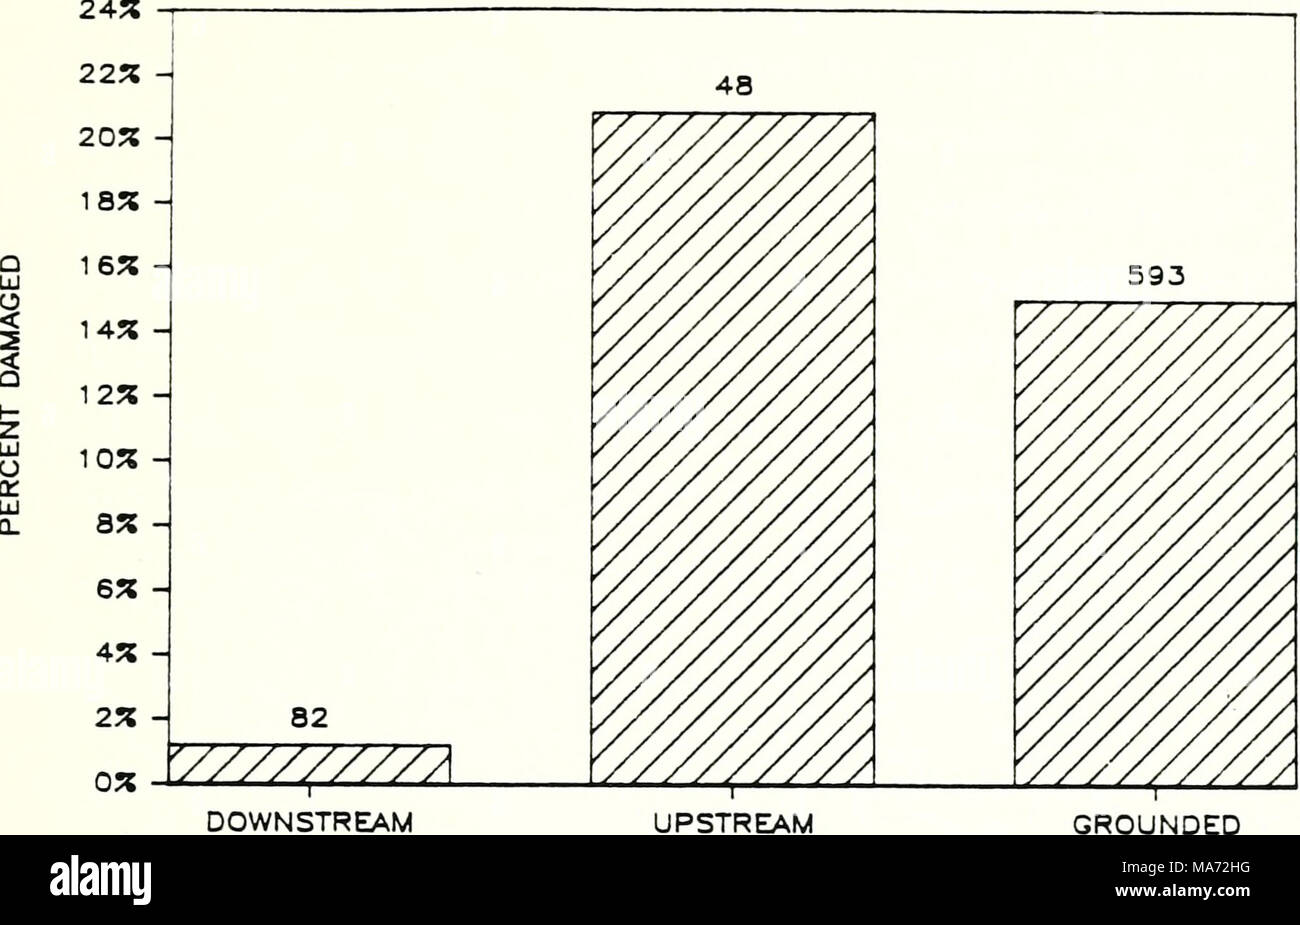 . Effects of fleeting on mussels. : Interim report . Note: Numbers at the top of bars indicate the total number of live Amblema plicata collected from the plot in 1984. DOWNSTREAM = unfleeted plot, downstream control UPSTREAM = unfleeted plot, upstream control GROUNDED = fleeted plot, barges against shore Figure 5. Shell damage rates for live Amblema plicata collected in 1984 from fleeted and unfleeted plots in the Illinois River at Naples. 31 Stock Photo